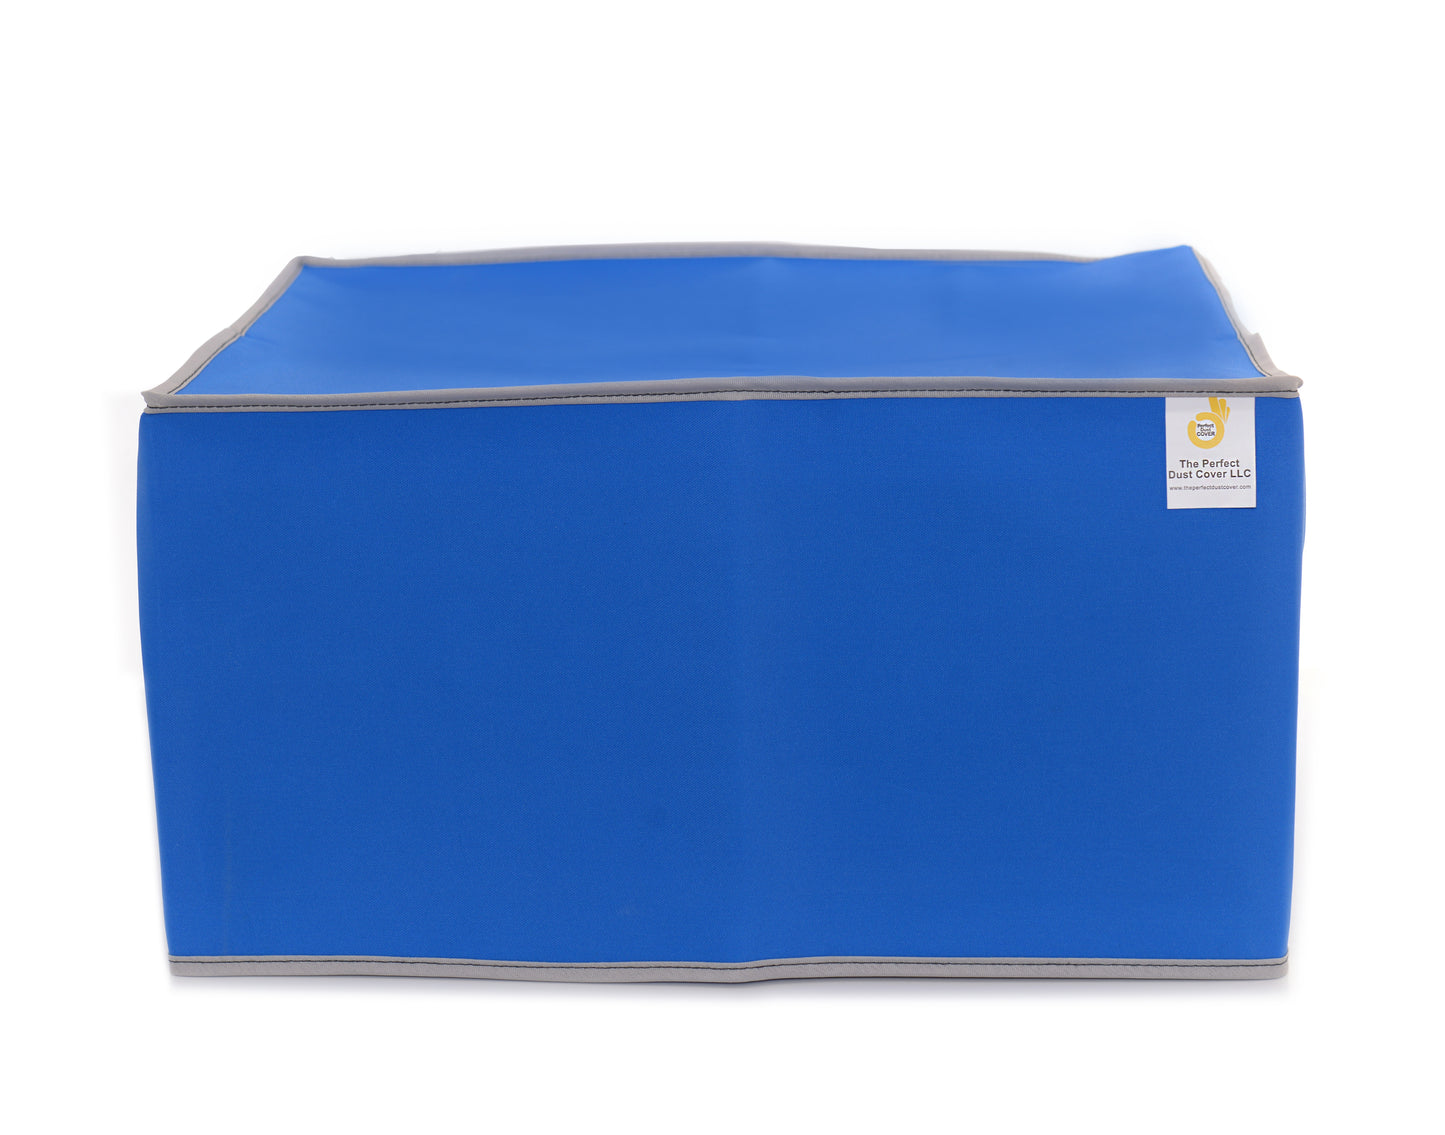 The Perfect Dust Cover, Royal Blue Nylon Cover Compatible with Roland VersaUV LEF2-200 20" UV Benchtop Flatbed Printer, Anti Static, Double Stitched and Waterproof Dust Cover Dimensions 47.3''W x 37.9''D x 21.6''H by The Perfect Dust Cover LLC